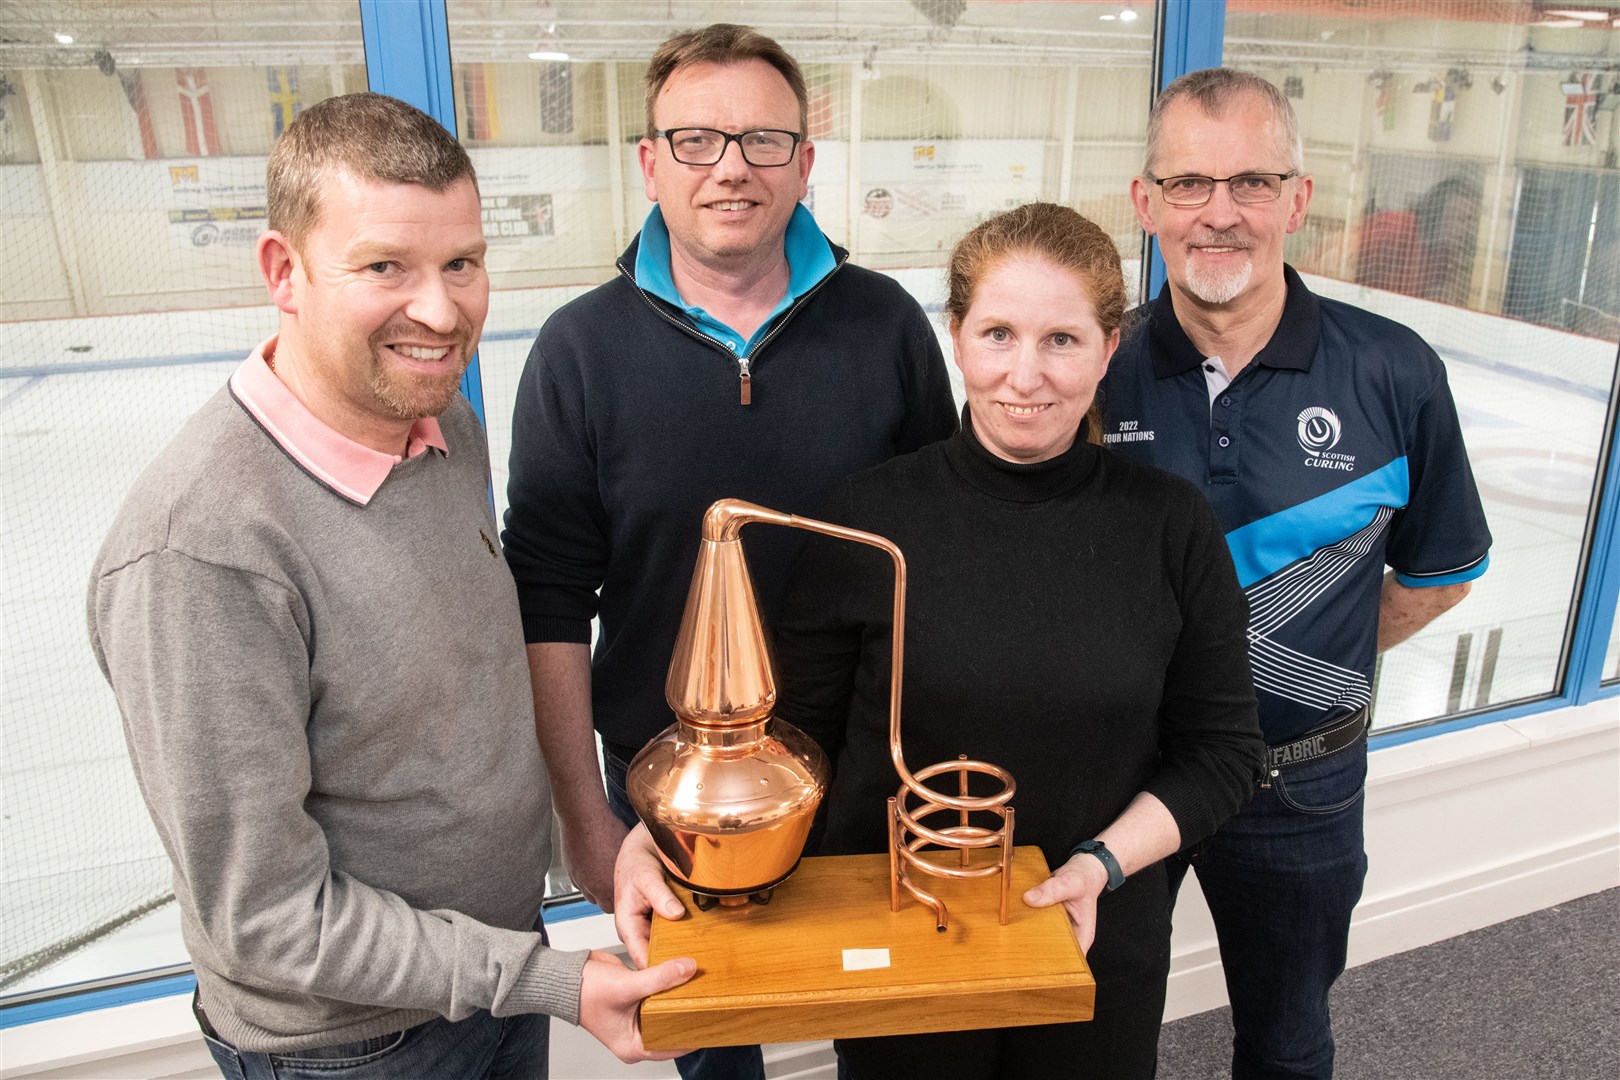 'High Road' overall winners team 'Ailsa Craig Crew' (from left) Mark Pieroni, Robert Clachan, Nicole Allan and Alistair Henry. Picture: Daniel Forsyth..